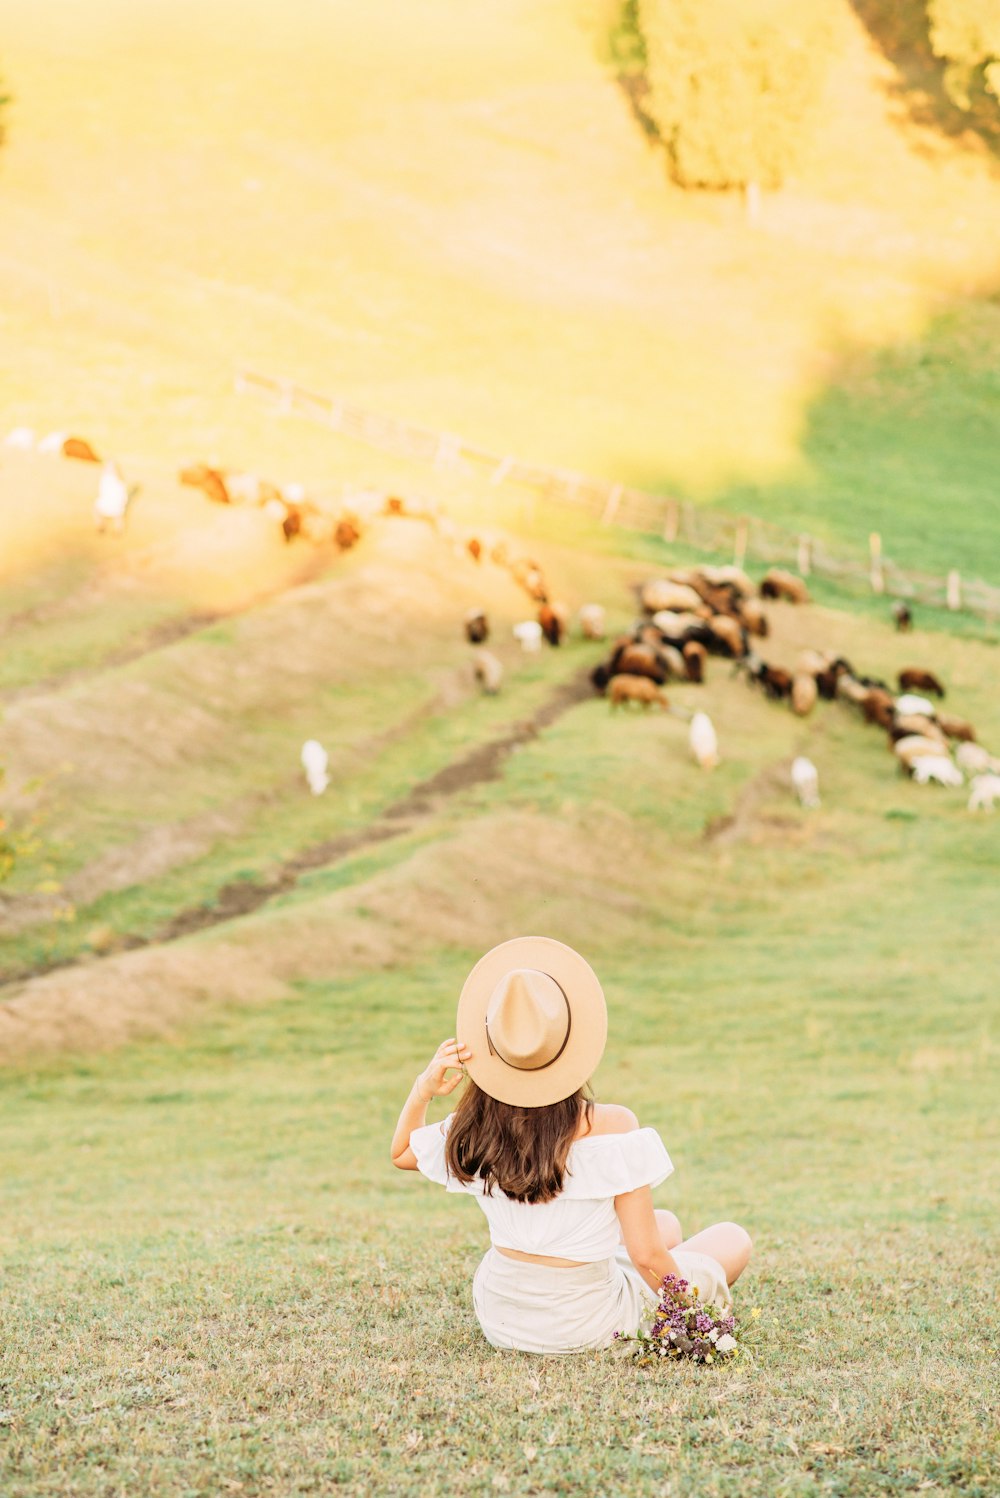 woman in white sun hat standing on green grass field during daytime